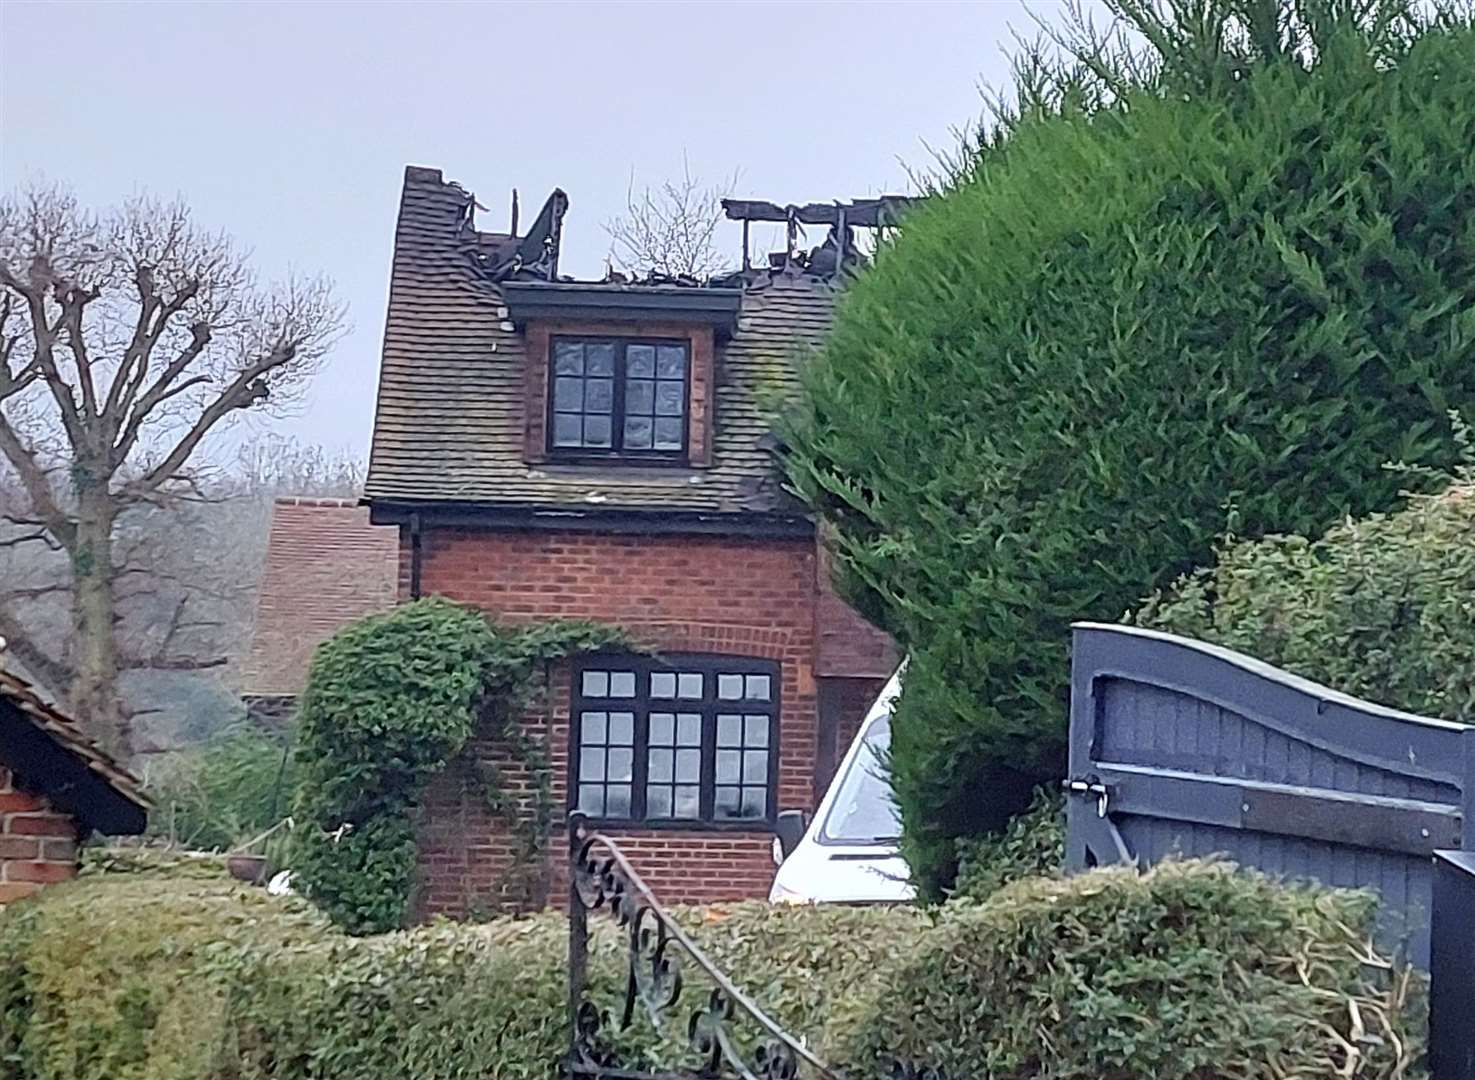 Damage to the roof of the house in Hackington Road, near Canterbury